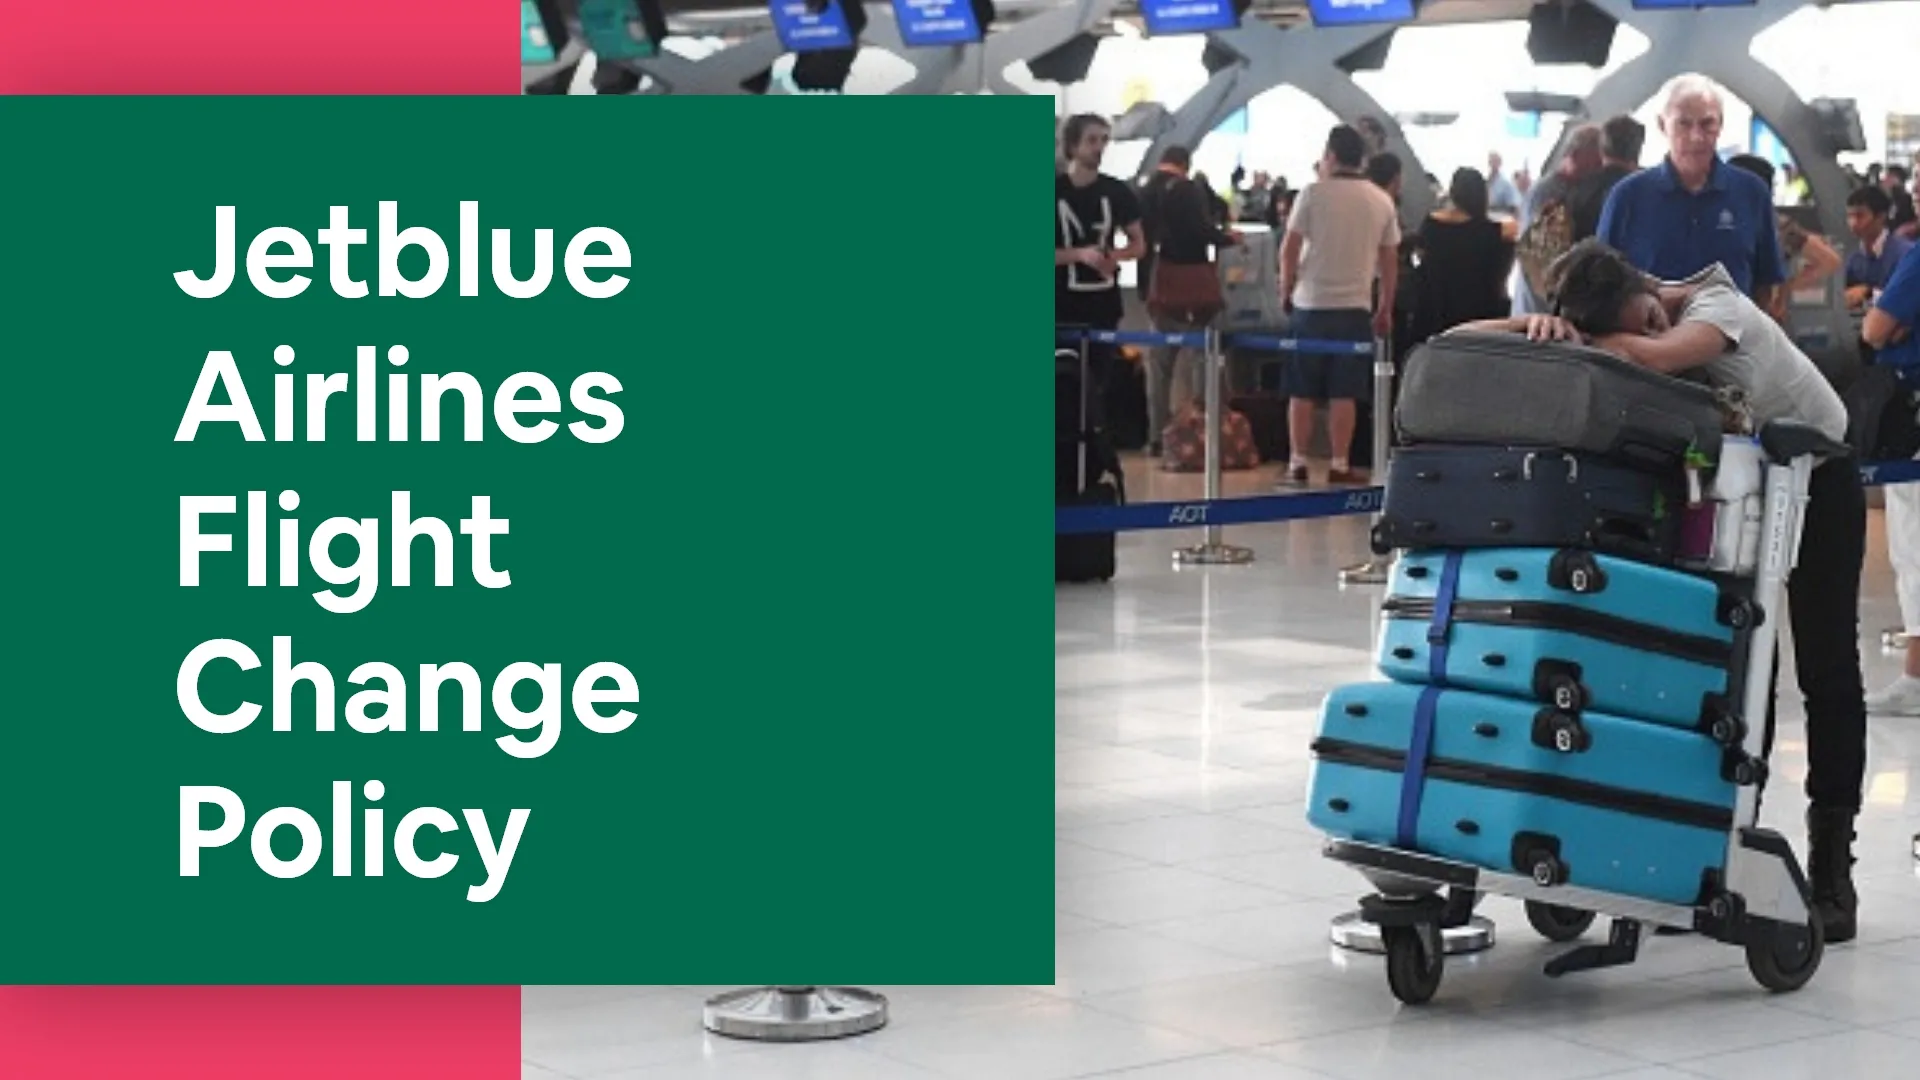 JetBlue Airlines Flight Change Policy online